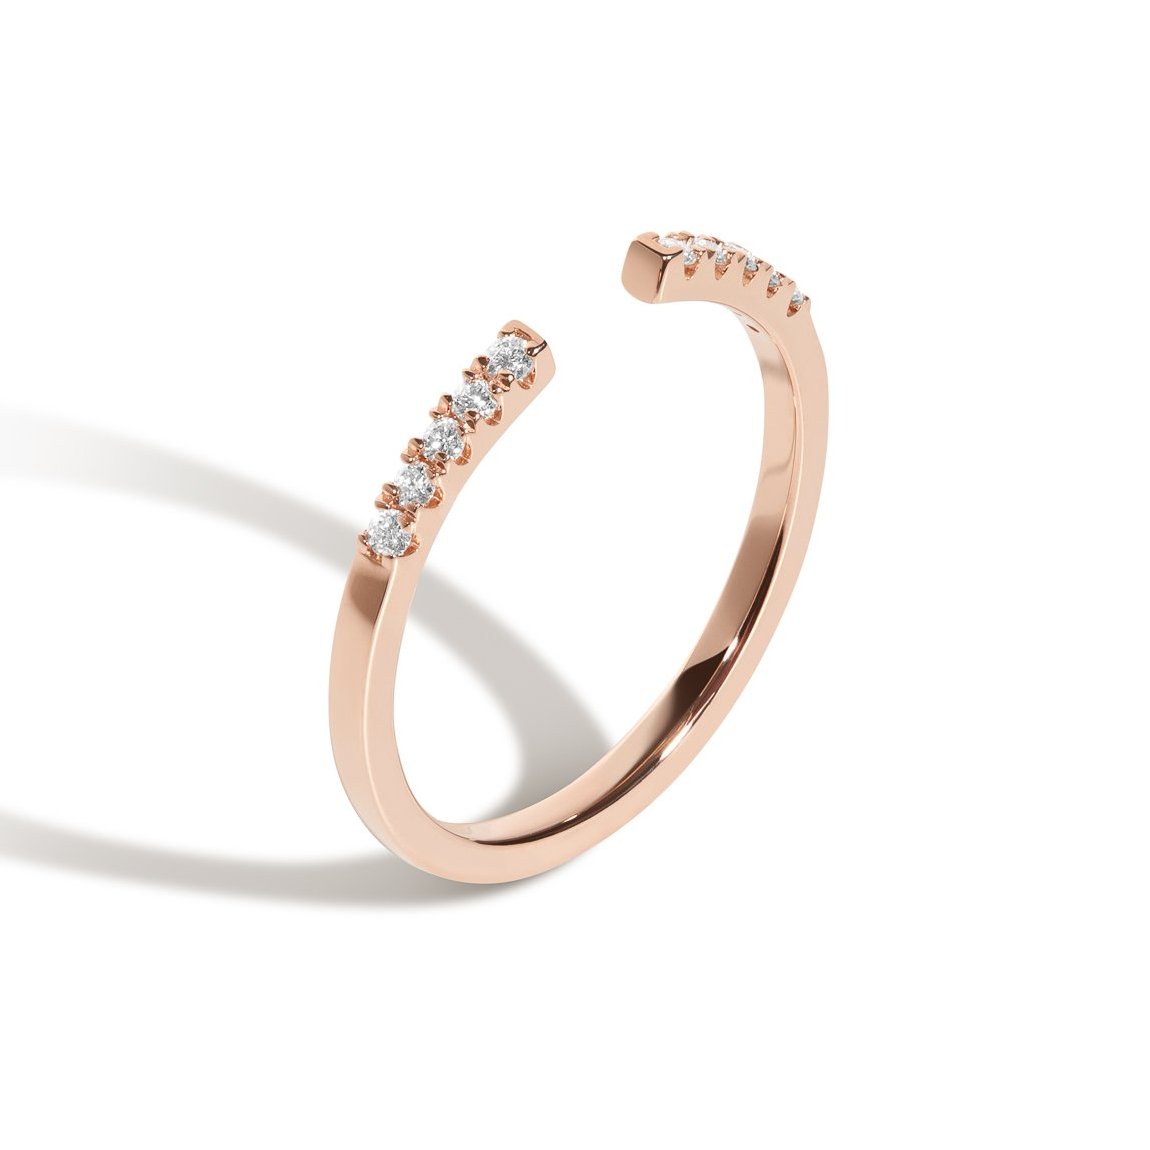 Shahla Karimi Jewelry Landmark Collection Central Park Ring No.1 - 14K Rose Gold With White Diamonds